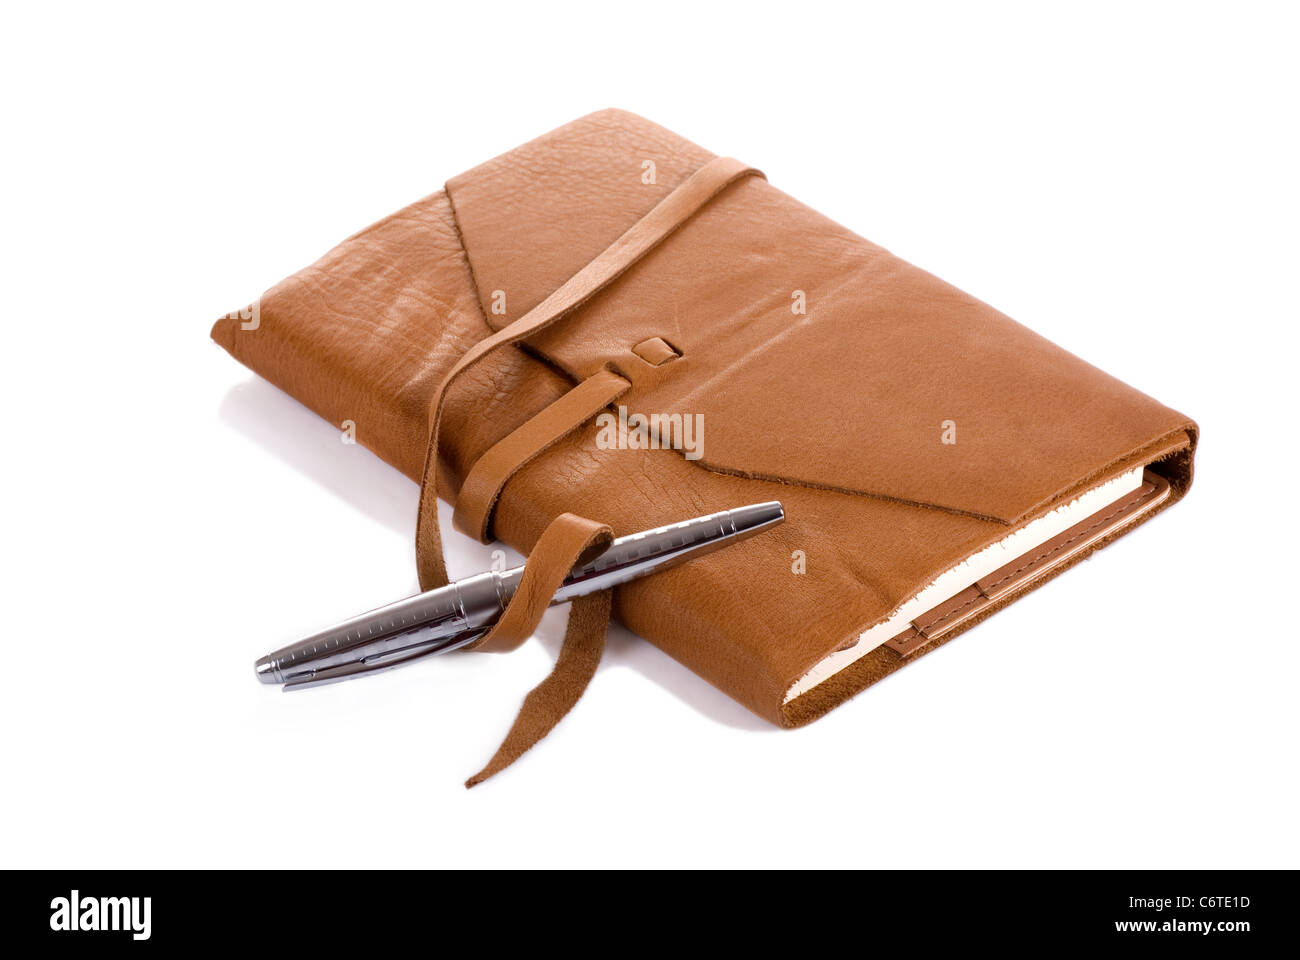 Horizontal image of a leather covered notebook and a silver pen with shadow against a 255 white background. Stock Photo